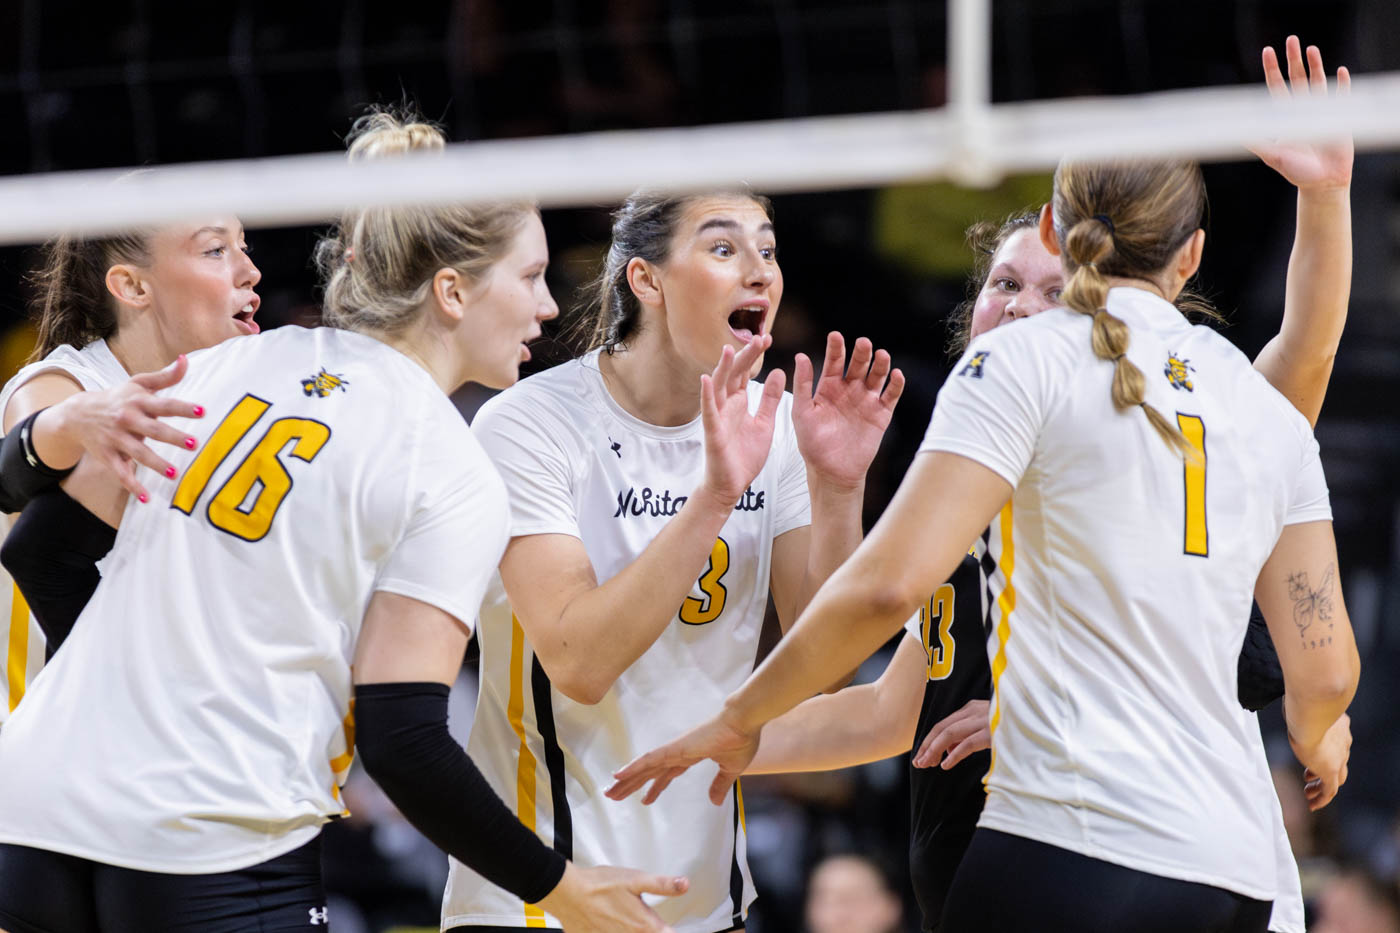 The Wichita State Shockers celebrate after scoring a point in the first set. Wichita State took the set 25-14.